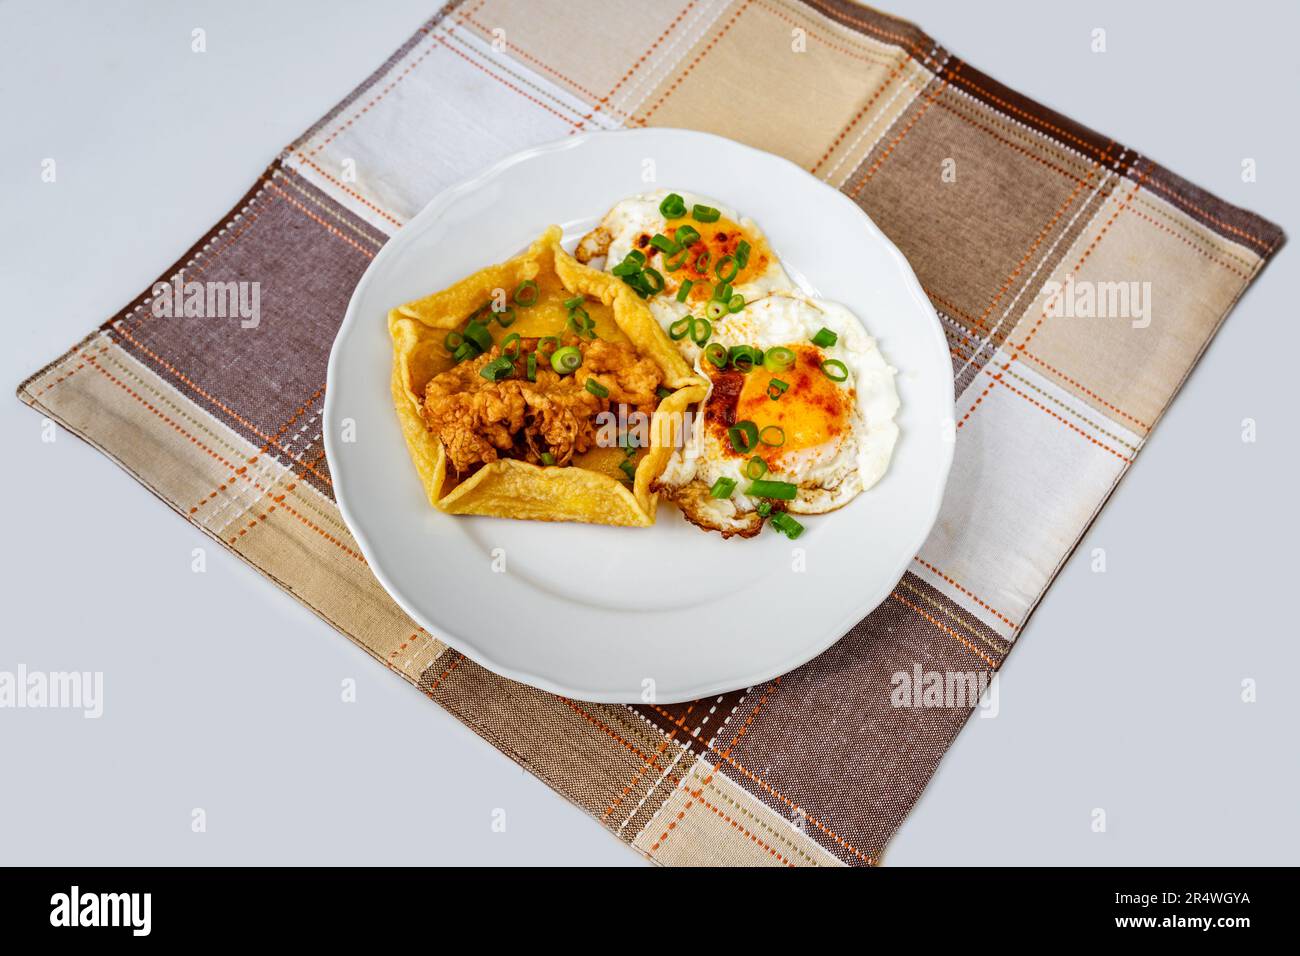 Fried egg and salty pancake with fried elderflower on plate on checkered tablecloth on white background. Stock Photo